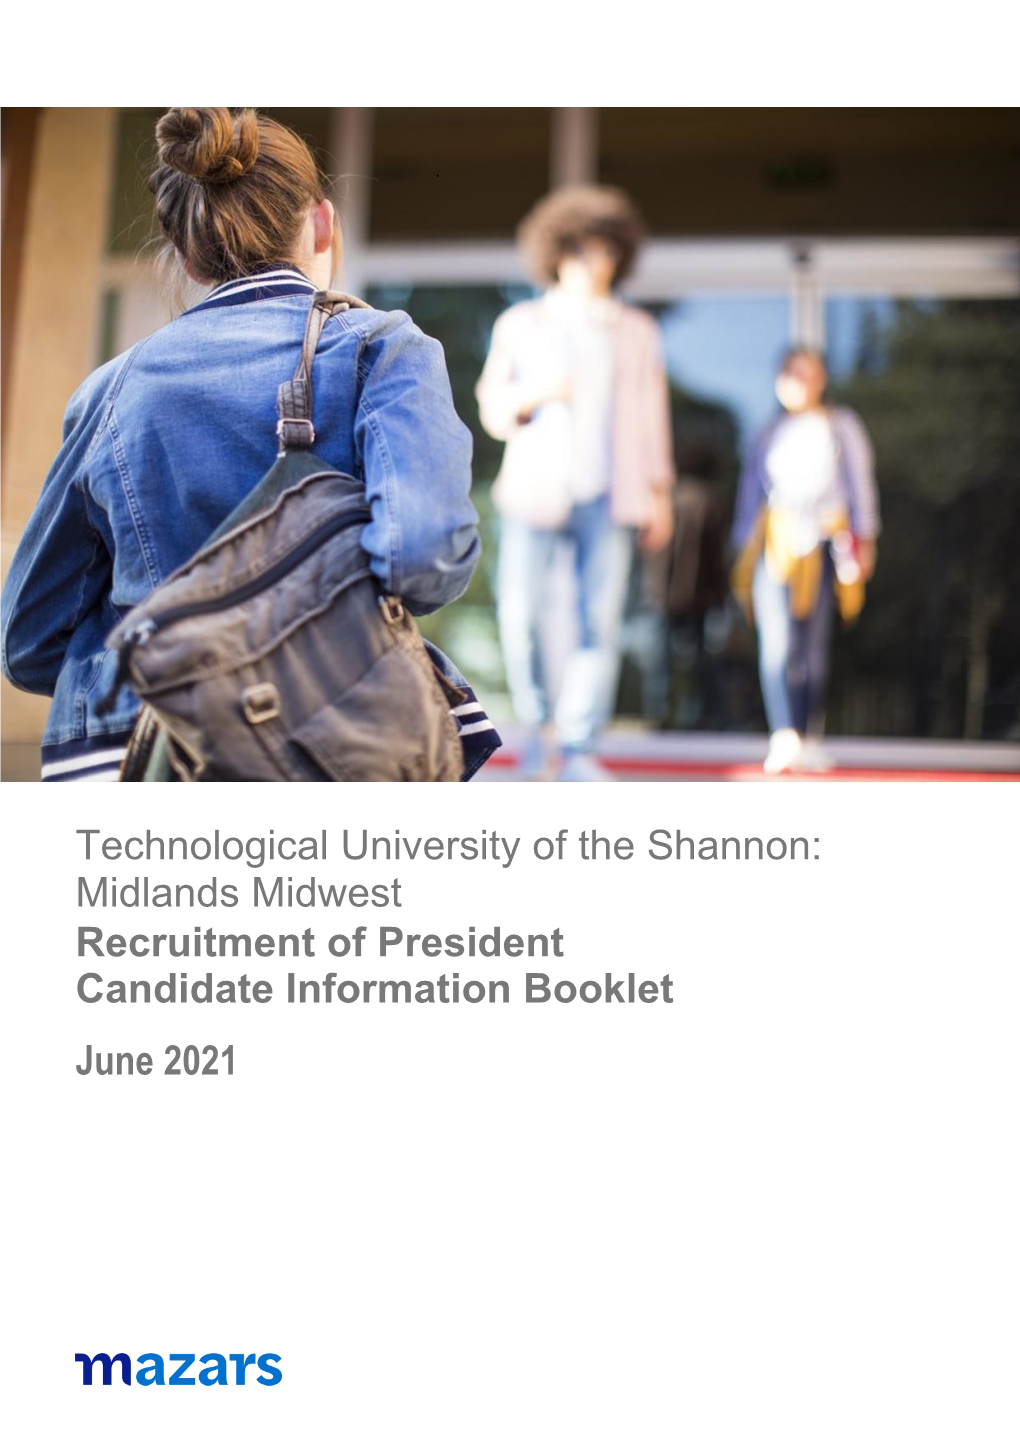 Technological University of the Shannon: Midlands Midwest Recruitment of President Candidate Information Booklet